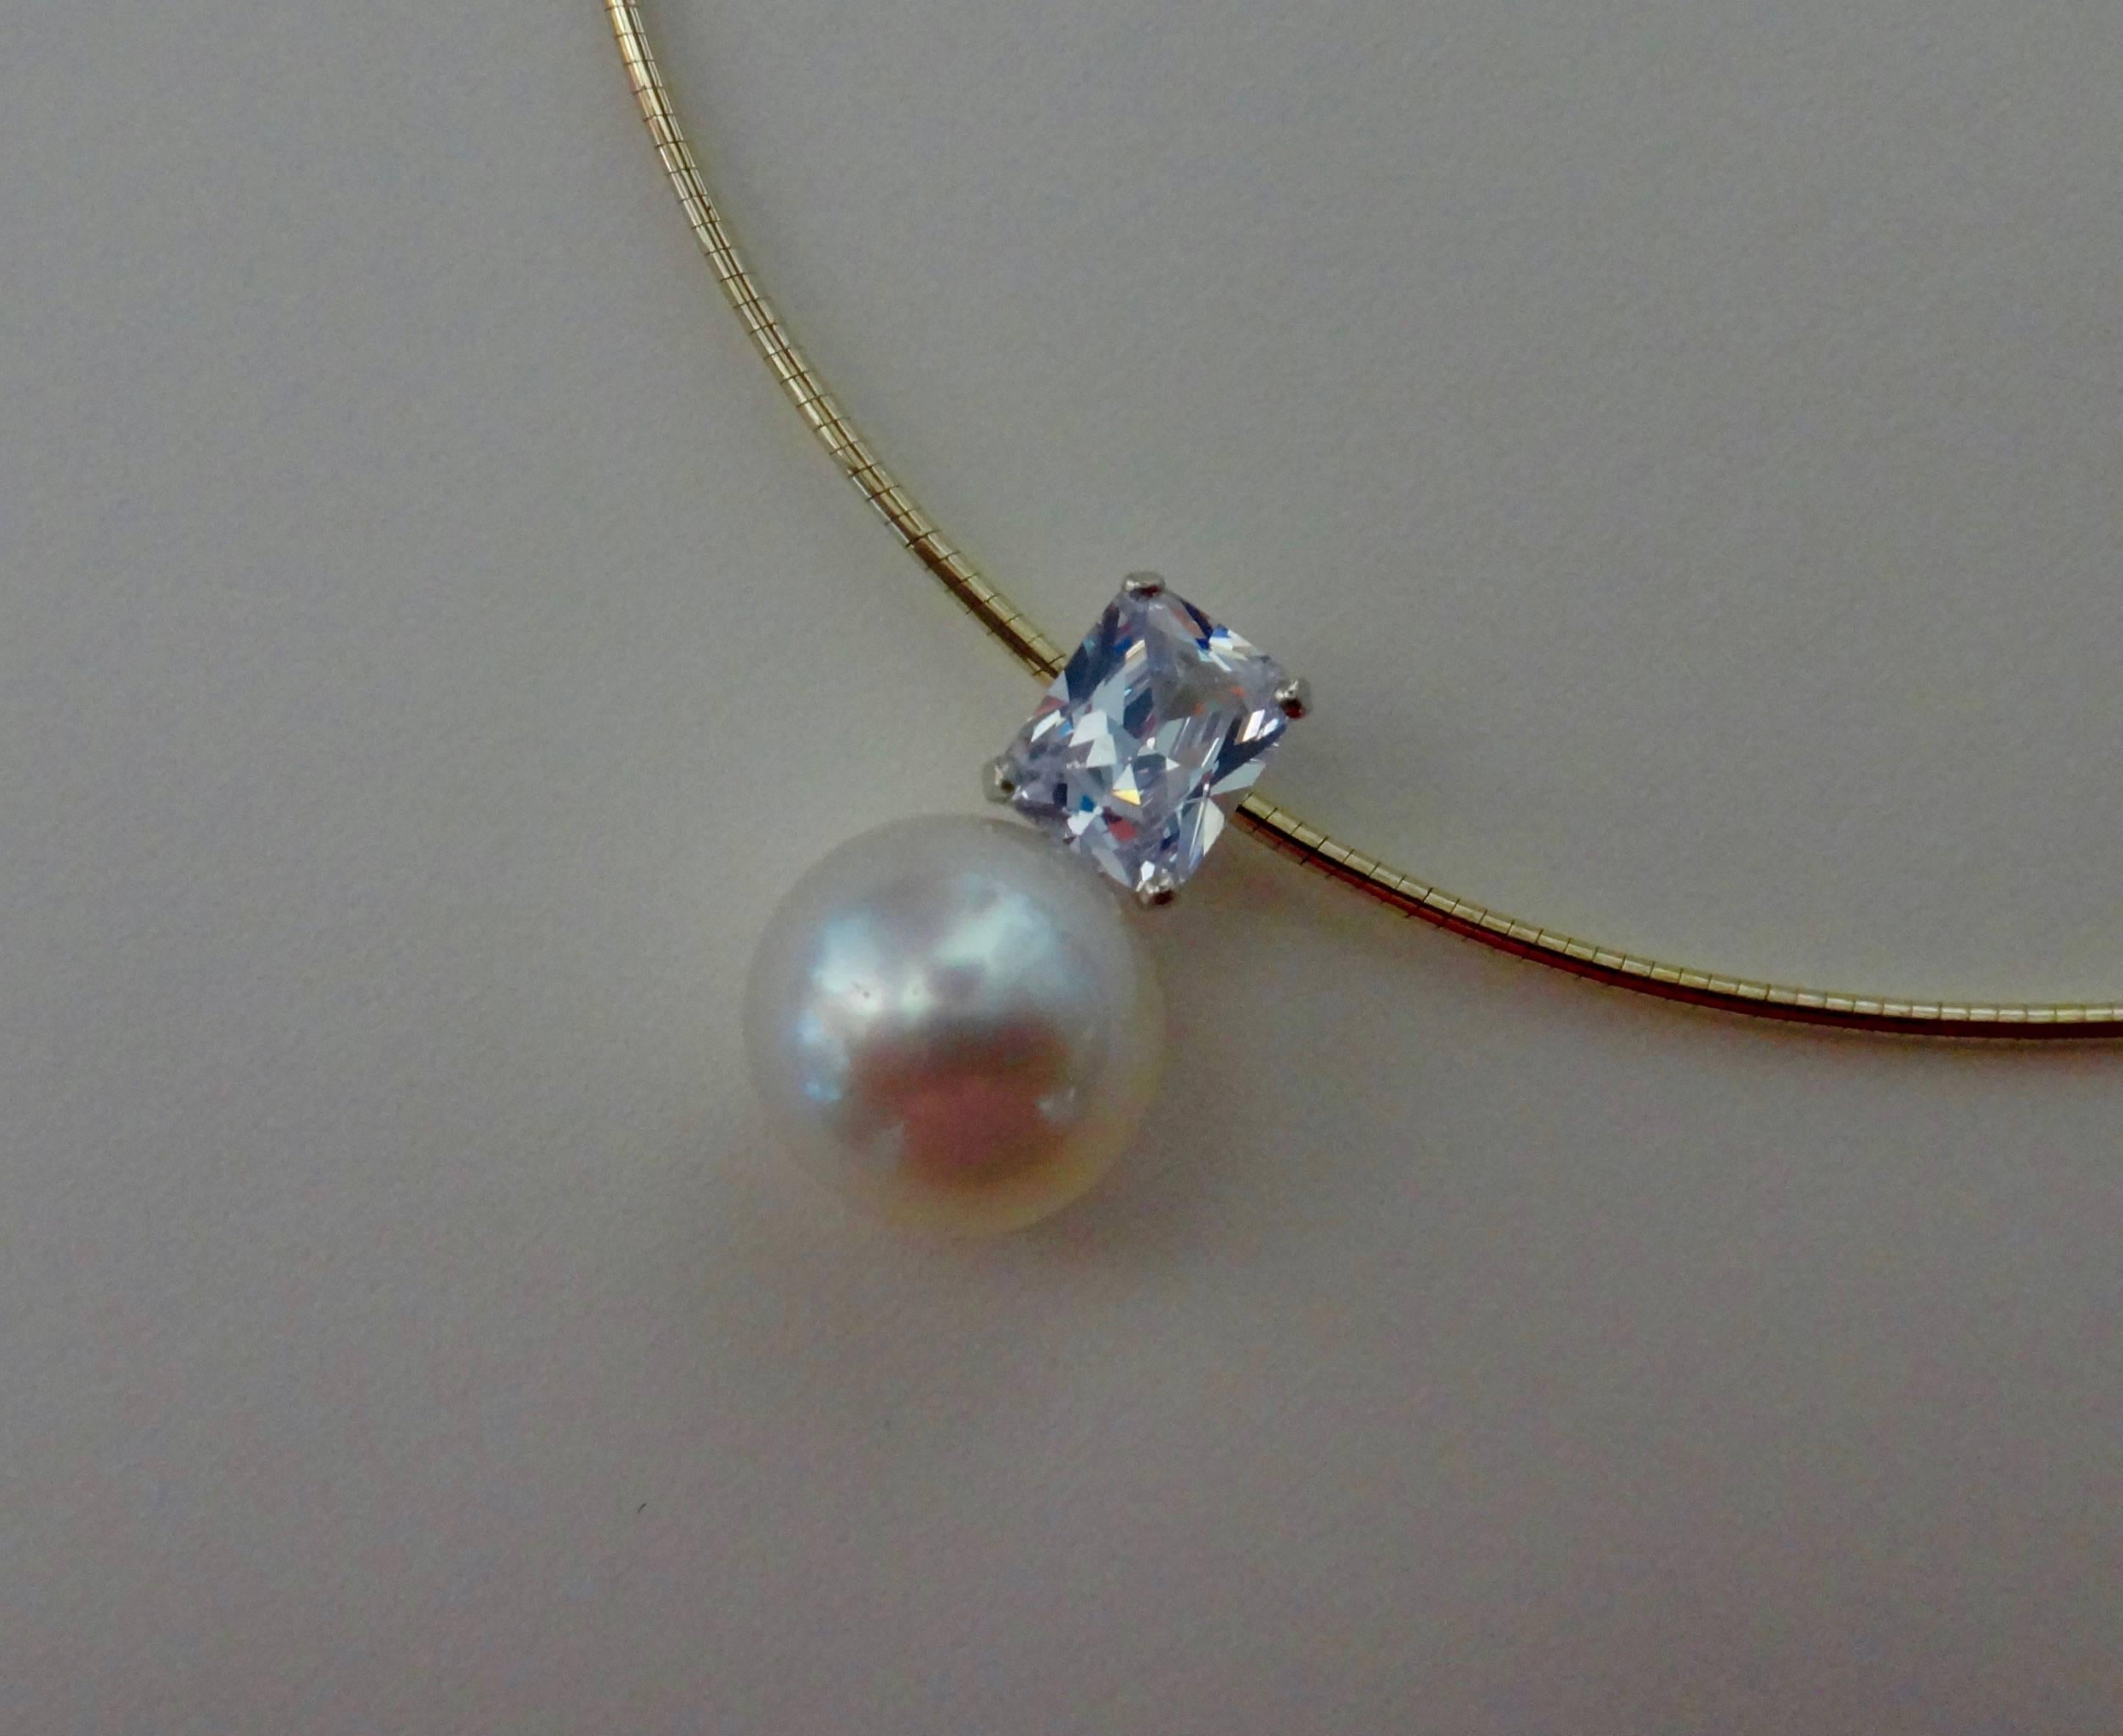 A 15mm, gem quality Paspaley South Seas pearl is paired with a radiant cut silver sapphire in this classic and readily wearable pendant.  The pearl possesses a flawless finish and brilliant white color.  The sapphire is colorless and exceptionally